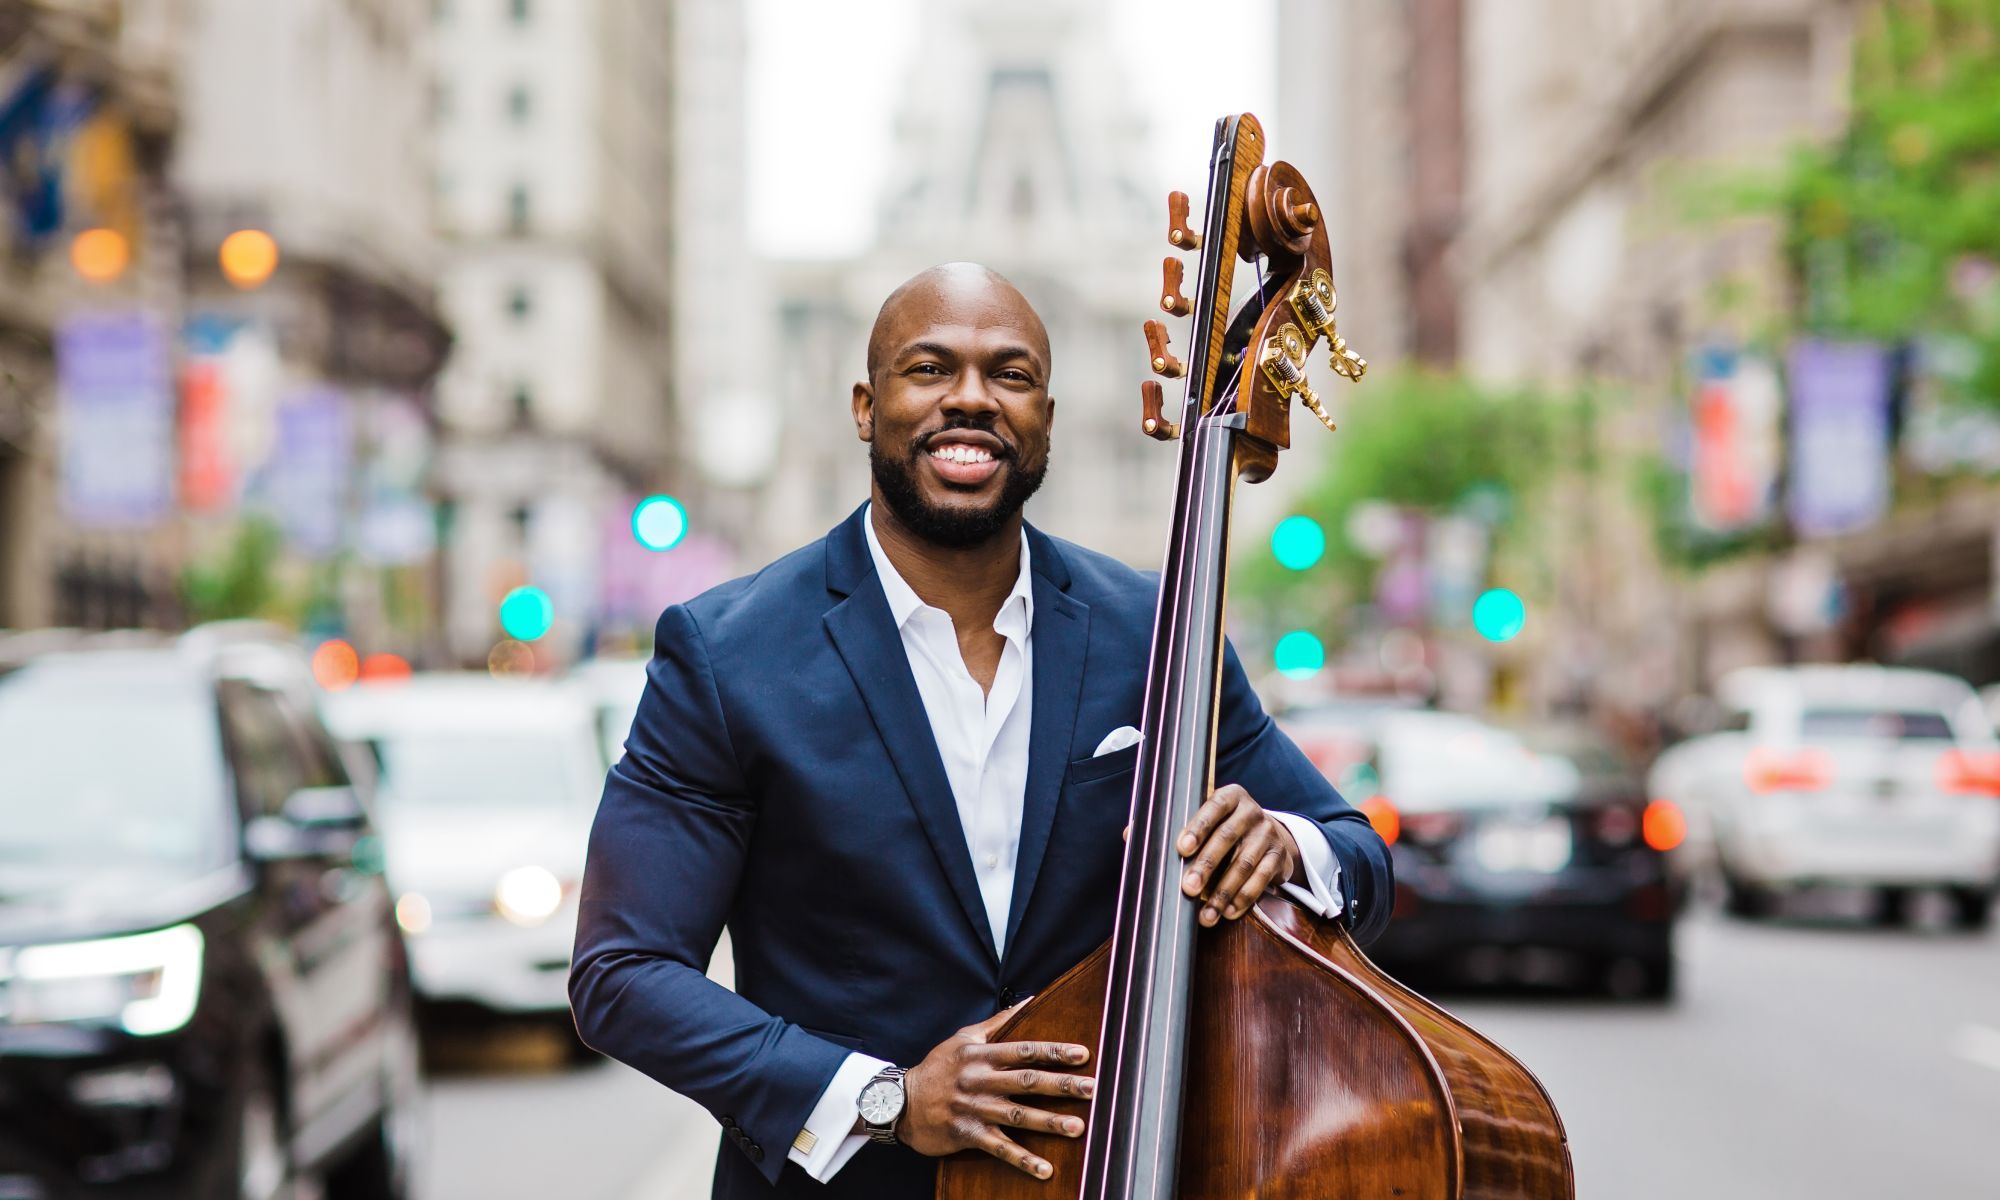 Joseph Conyers wears a blue suit with a white shirt, holding a string instrument in a busy city street